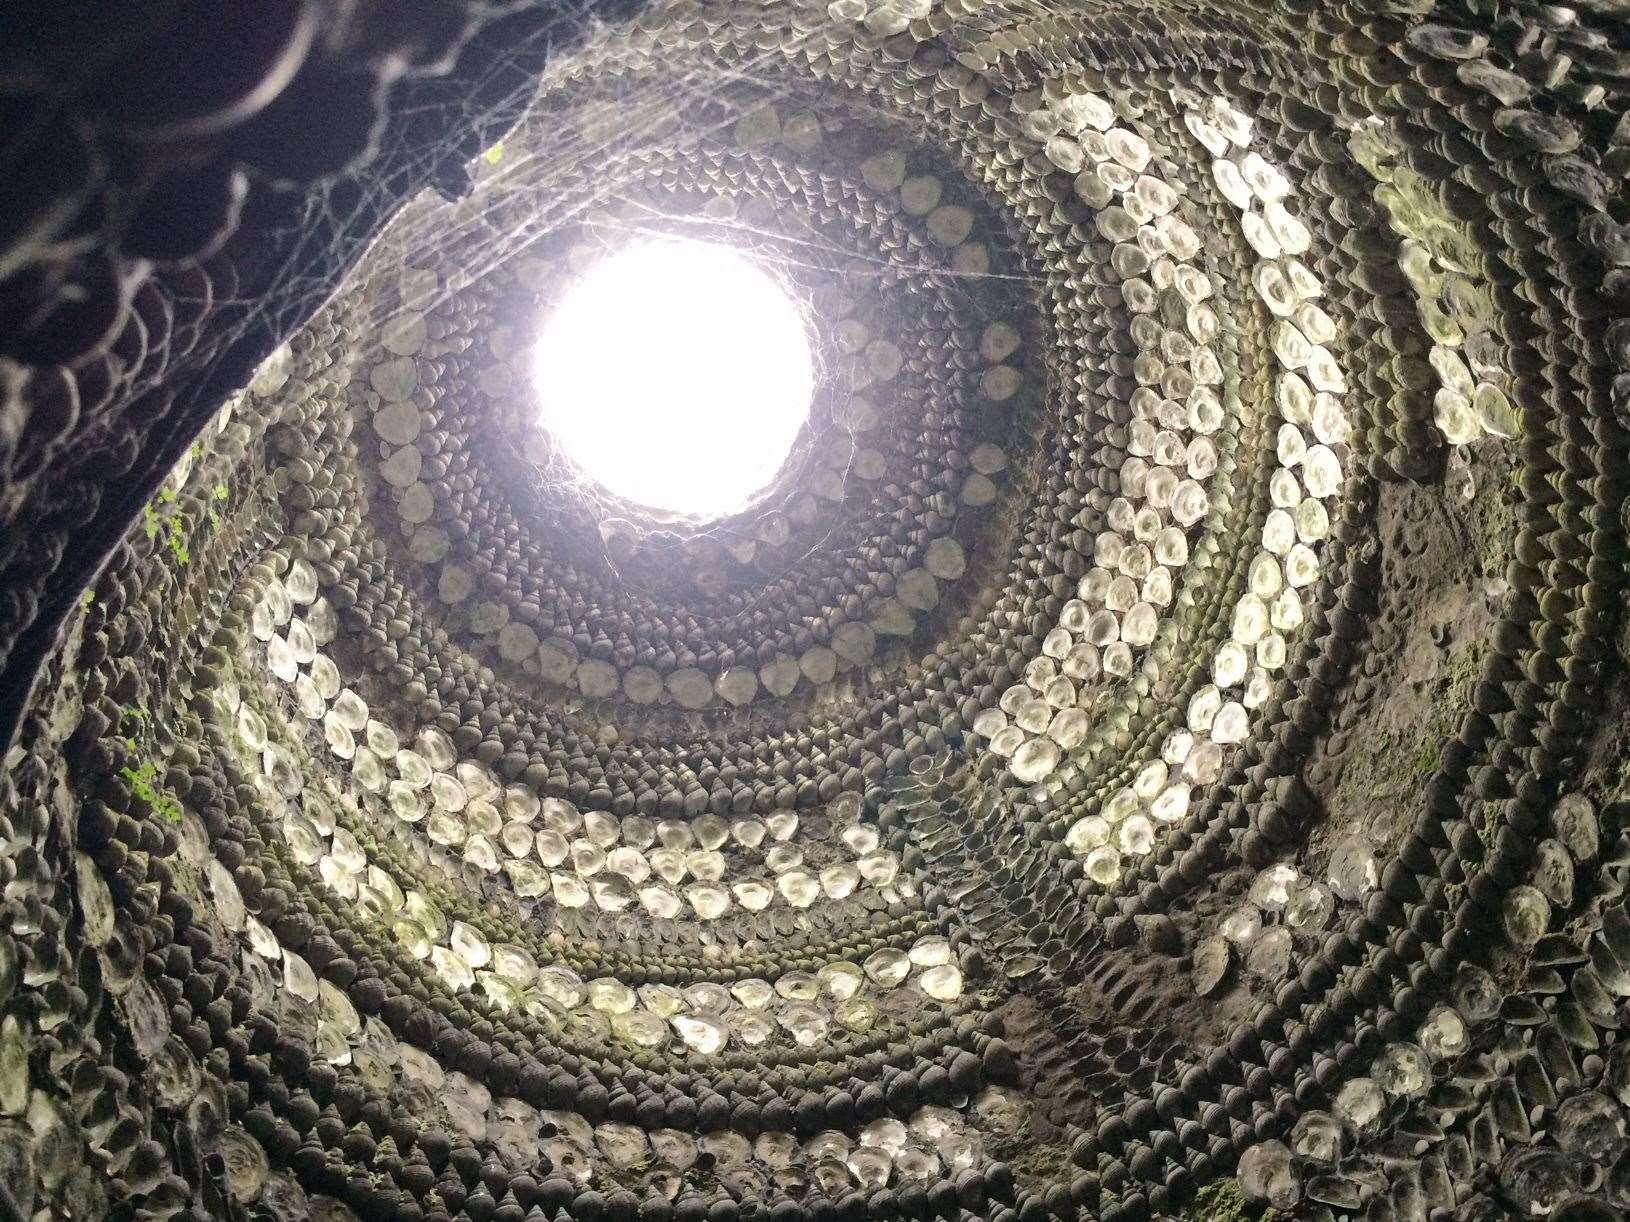 The Shell Grotto in Cliftonville, Margate